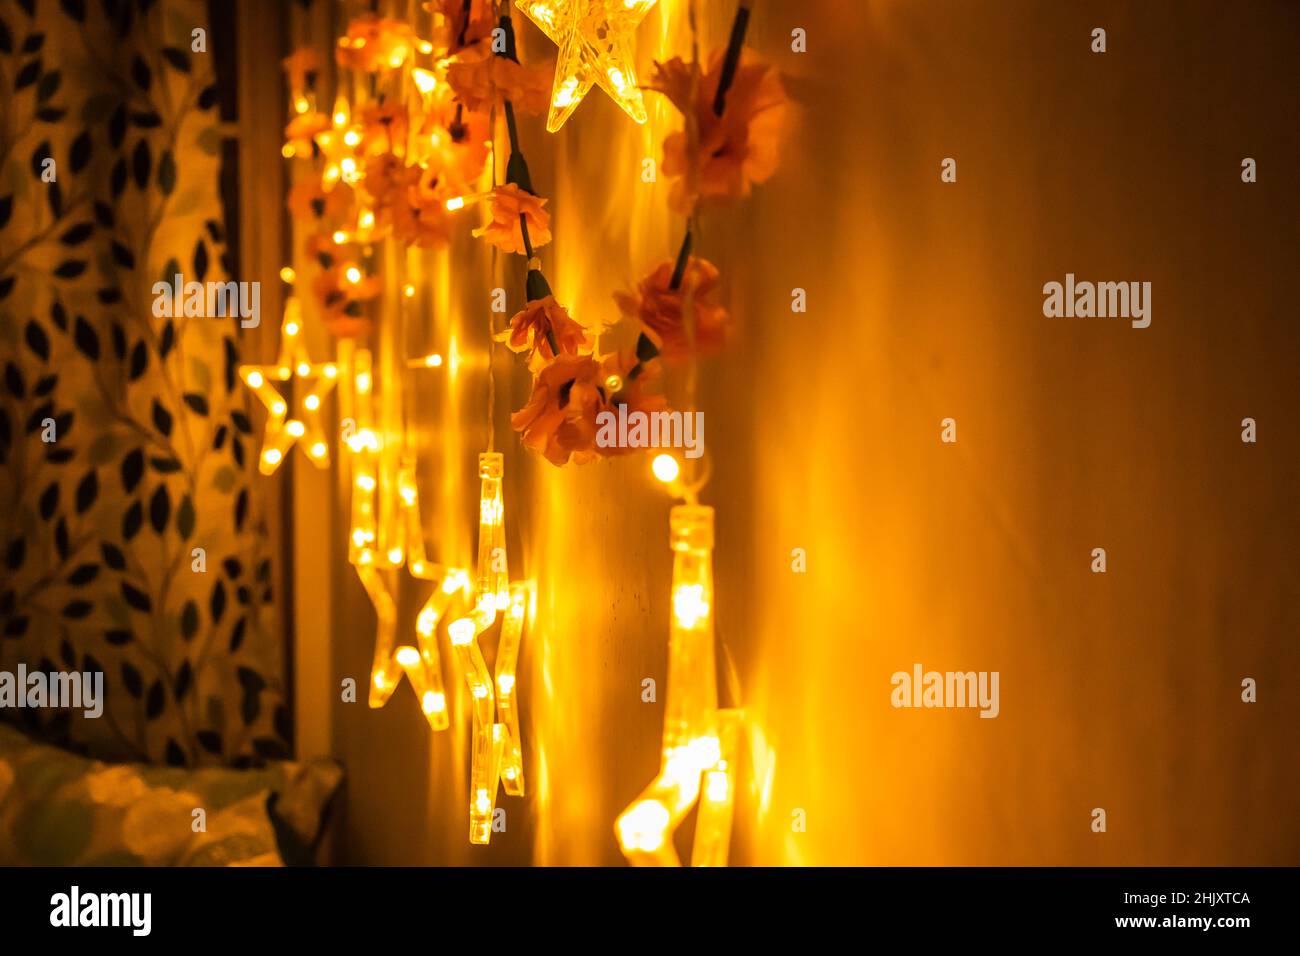 ferry lights indoor decoration at home on the occasion of festival celebrations Stock Photo